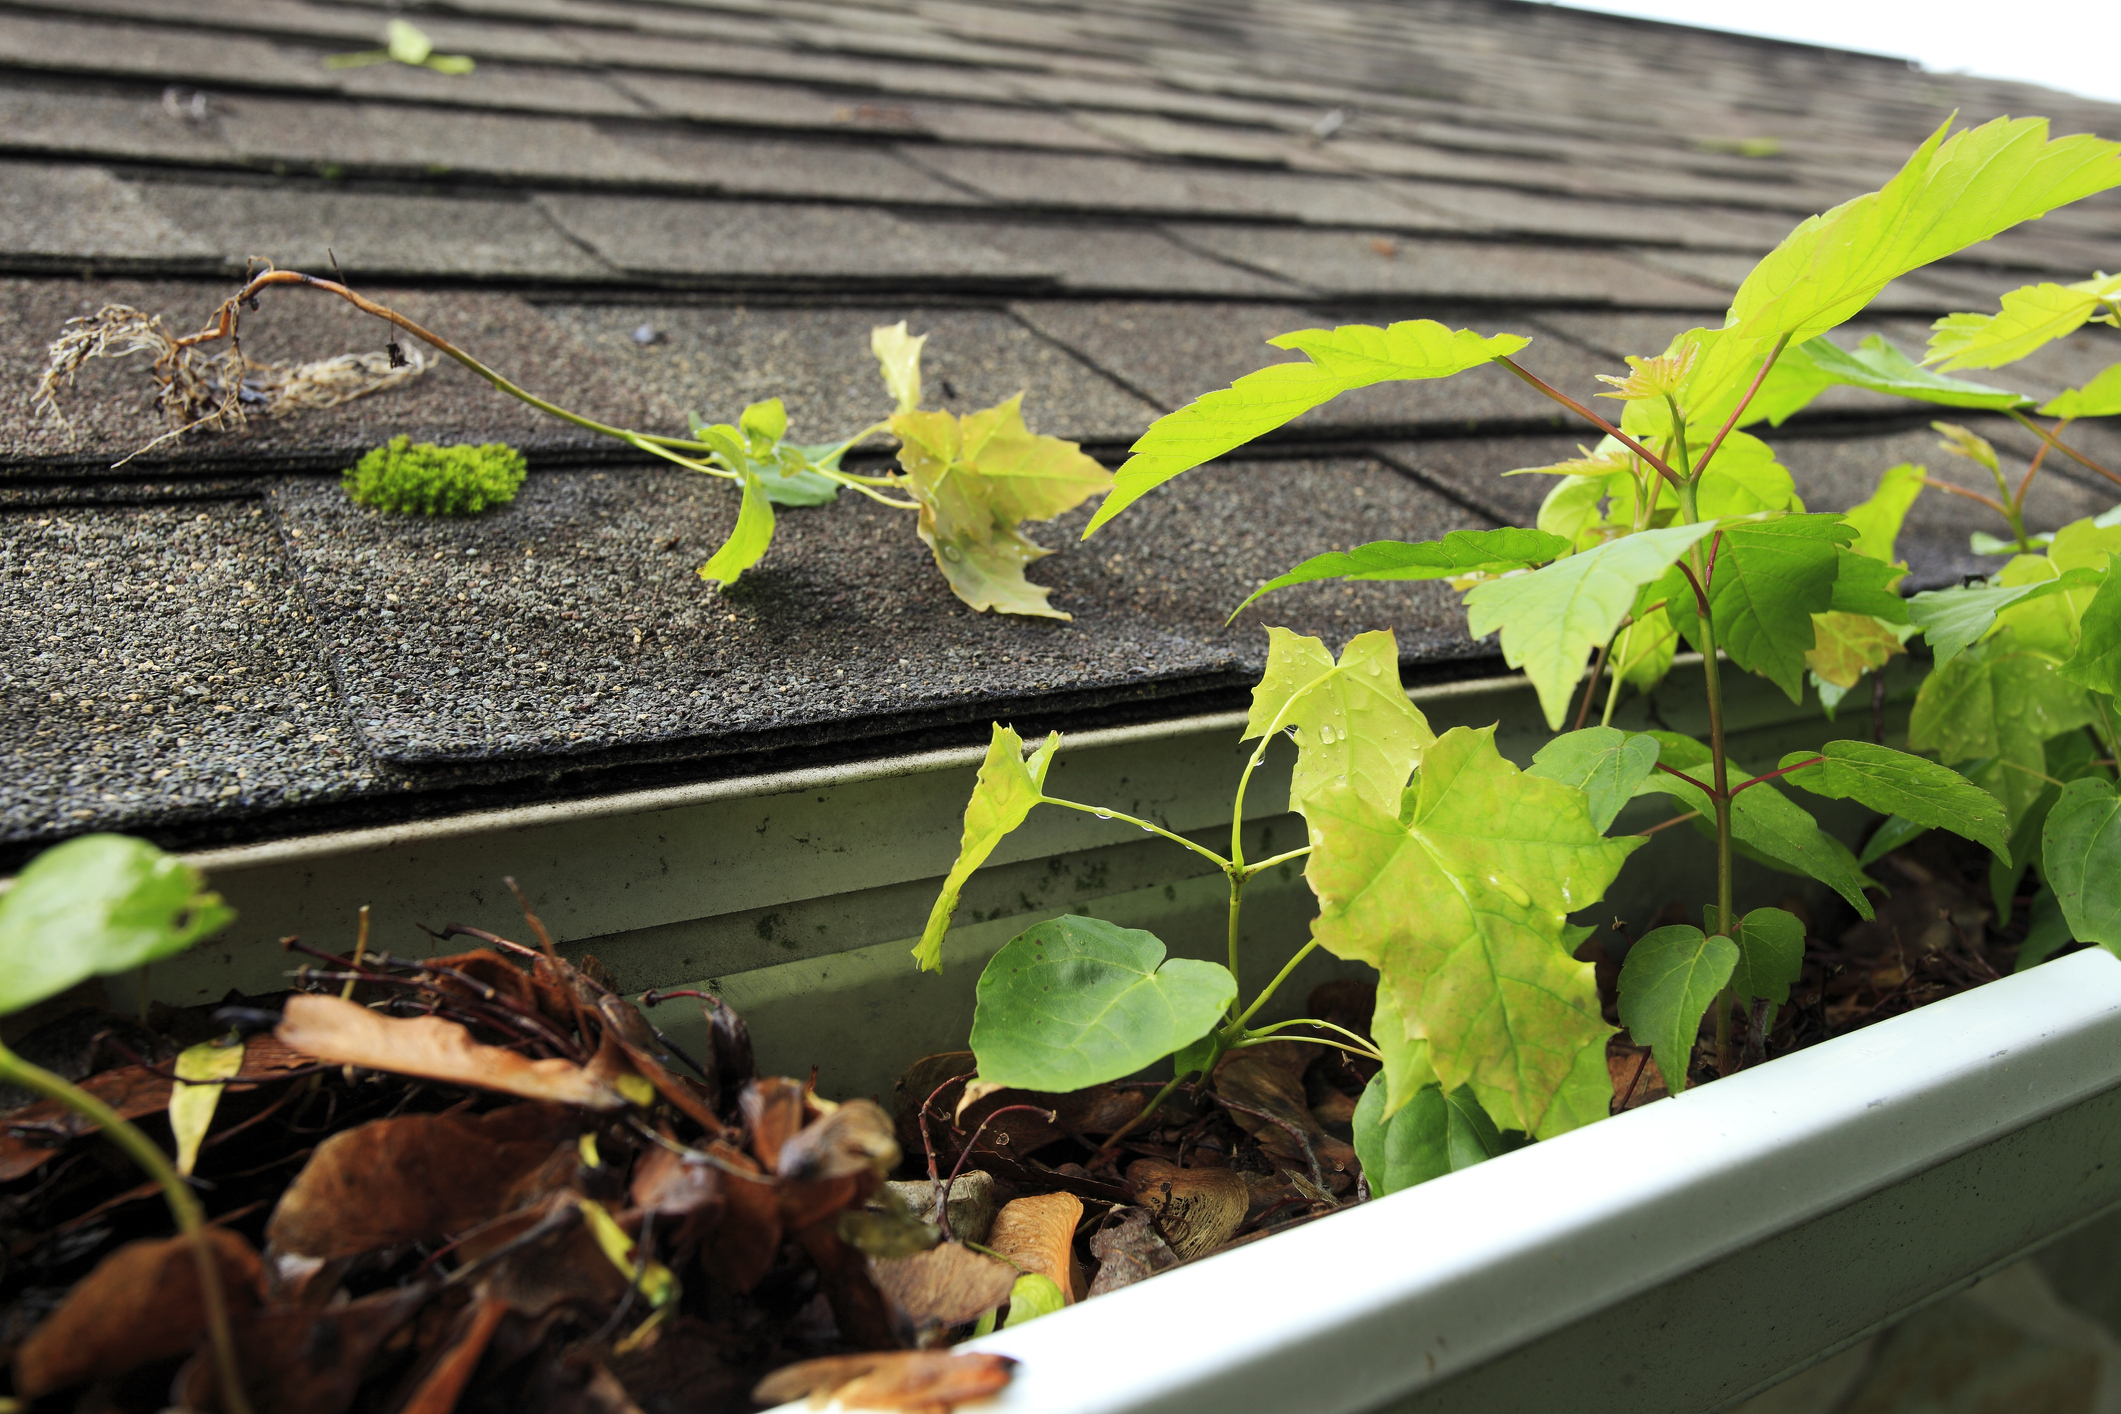 Roof gutters full of leaves and debris